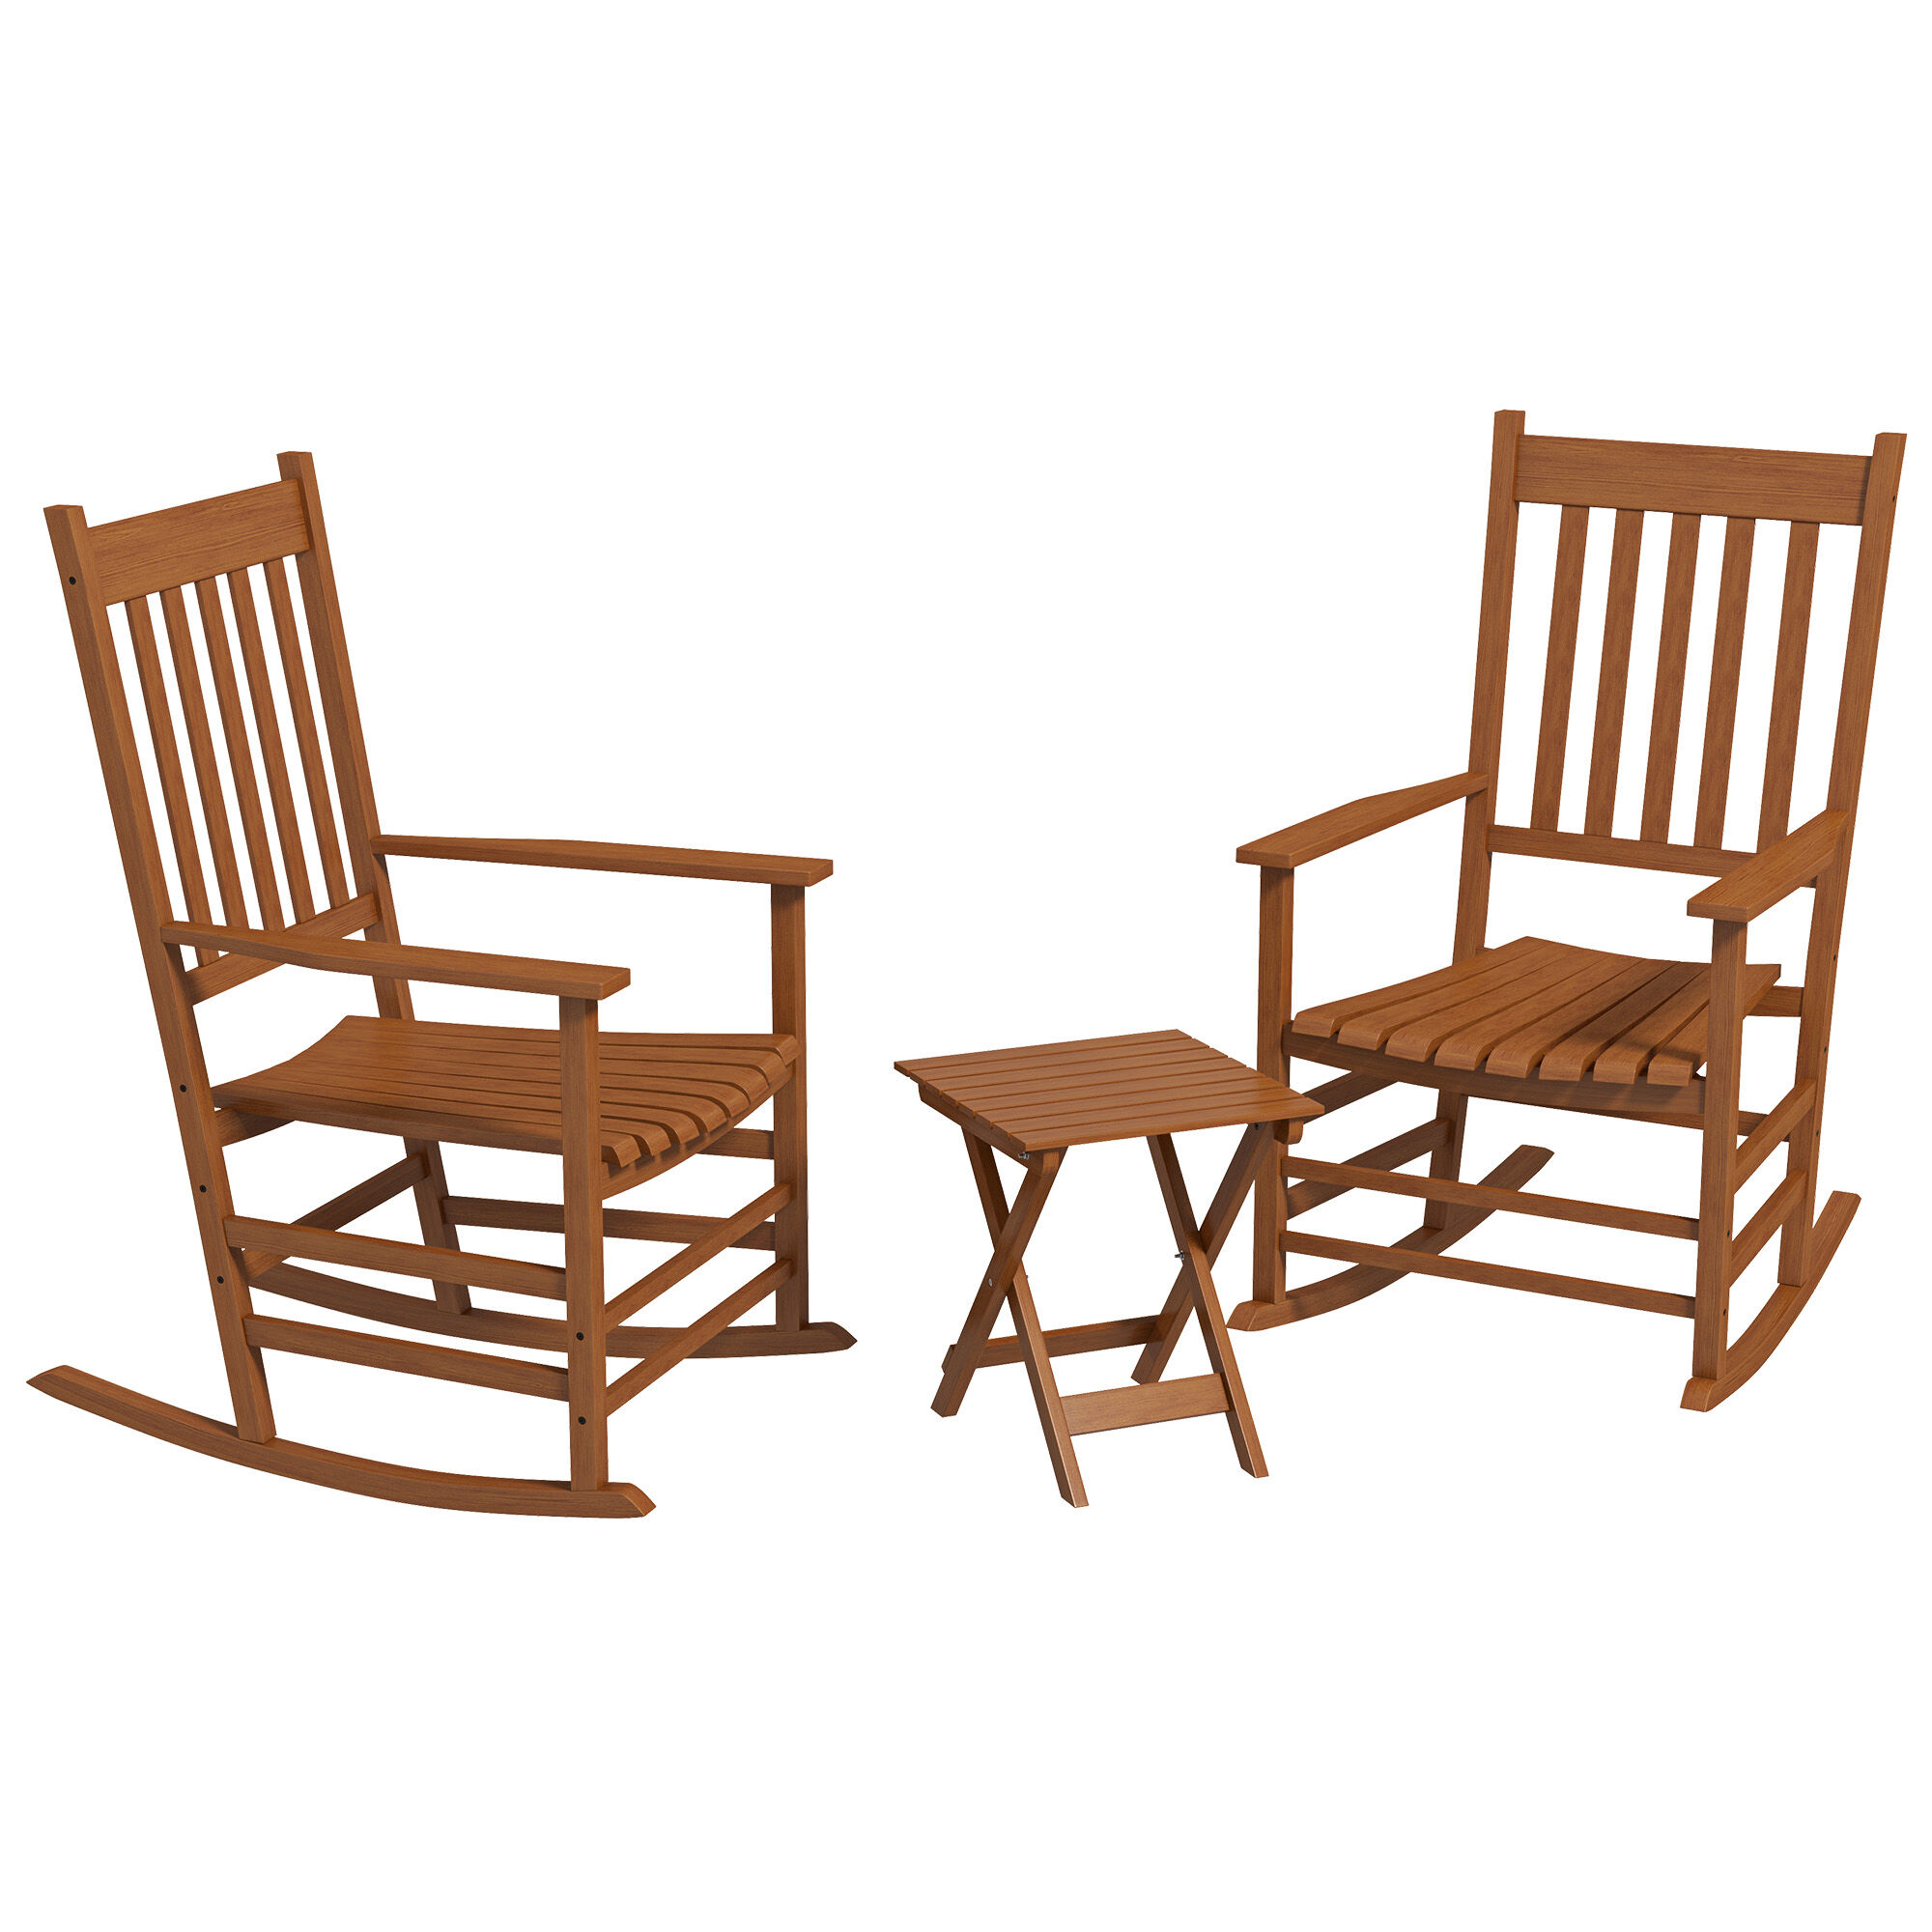 Outsunny Wooden Rocking Chair Set w/ Foldable Side Table, Outdoor Rocker Chairs w/ Slatted Top Table for Garden, Balcony, Porch, Up to 352 lbs., Teak